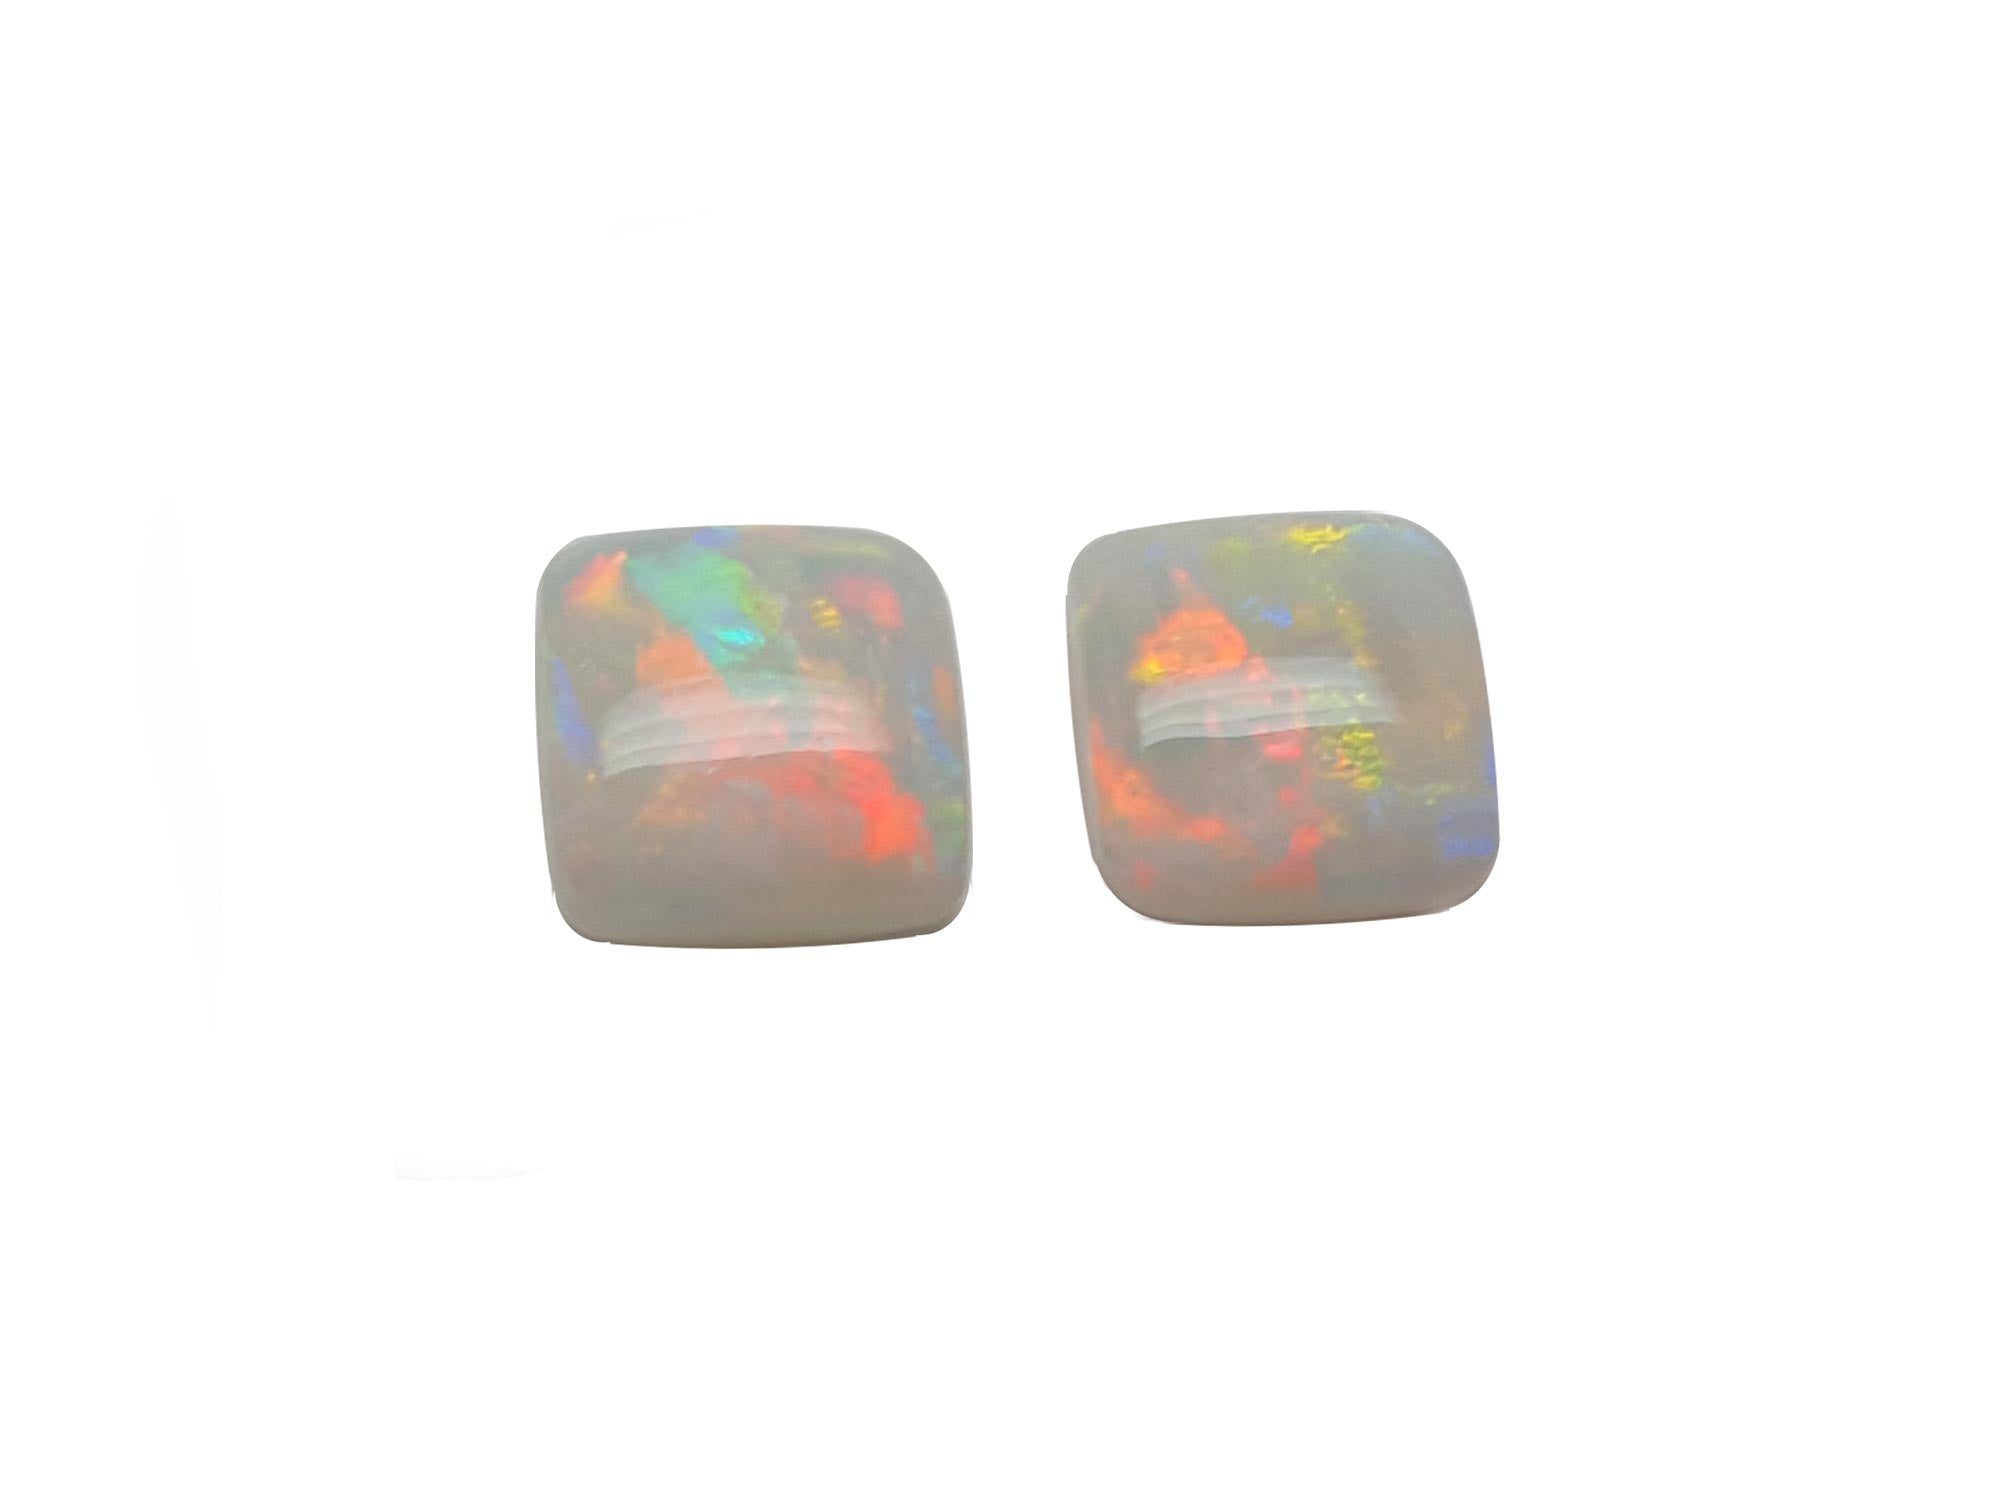 Loose opals for earrings